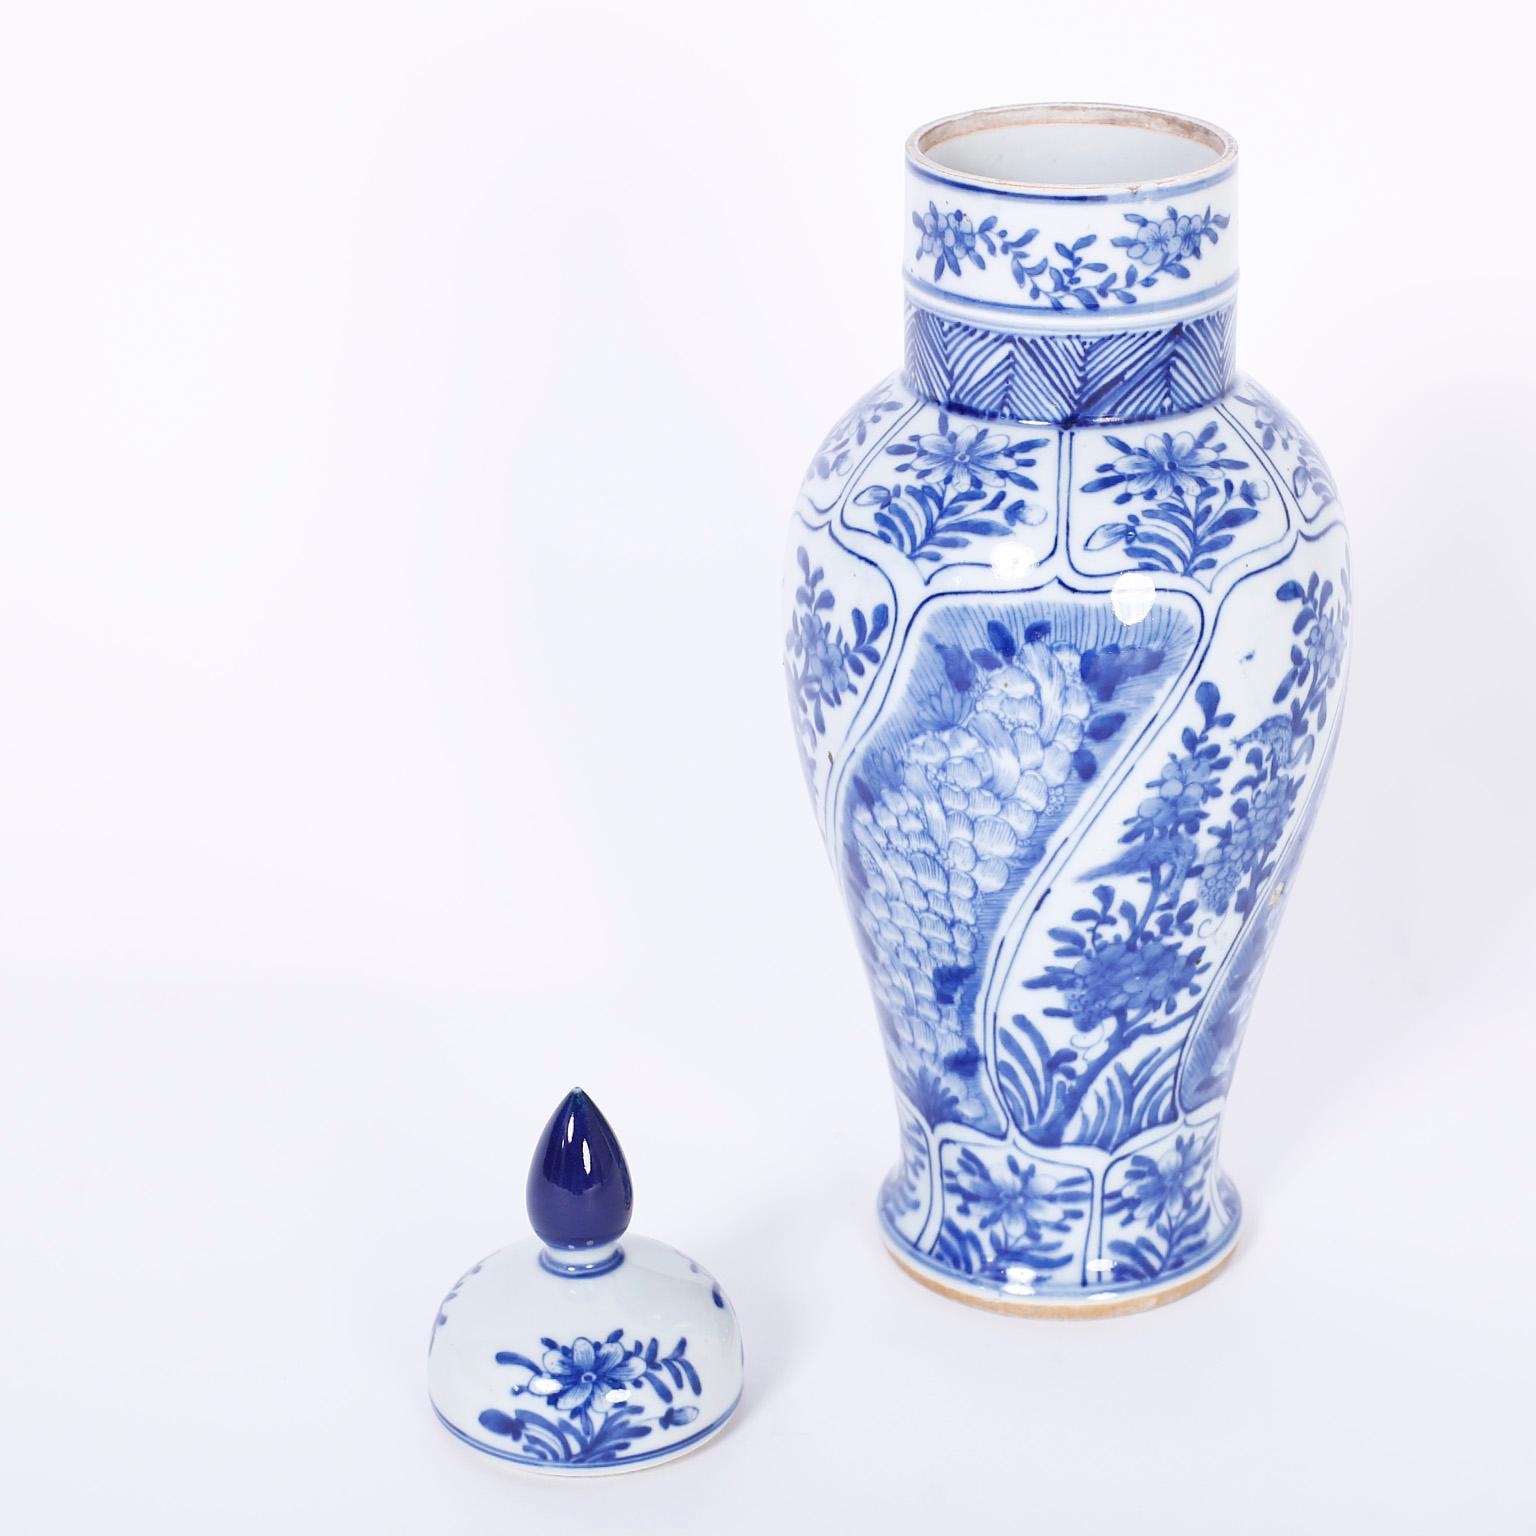 Contemporary Pair of Blue and White Chinese Porcelain Lidded Urns